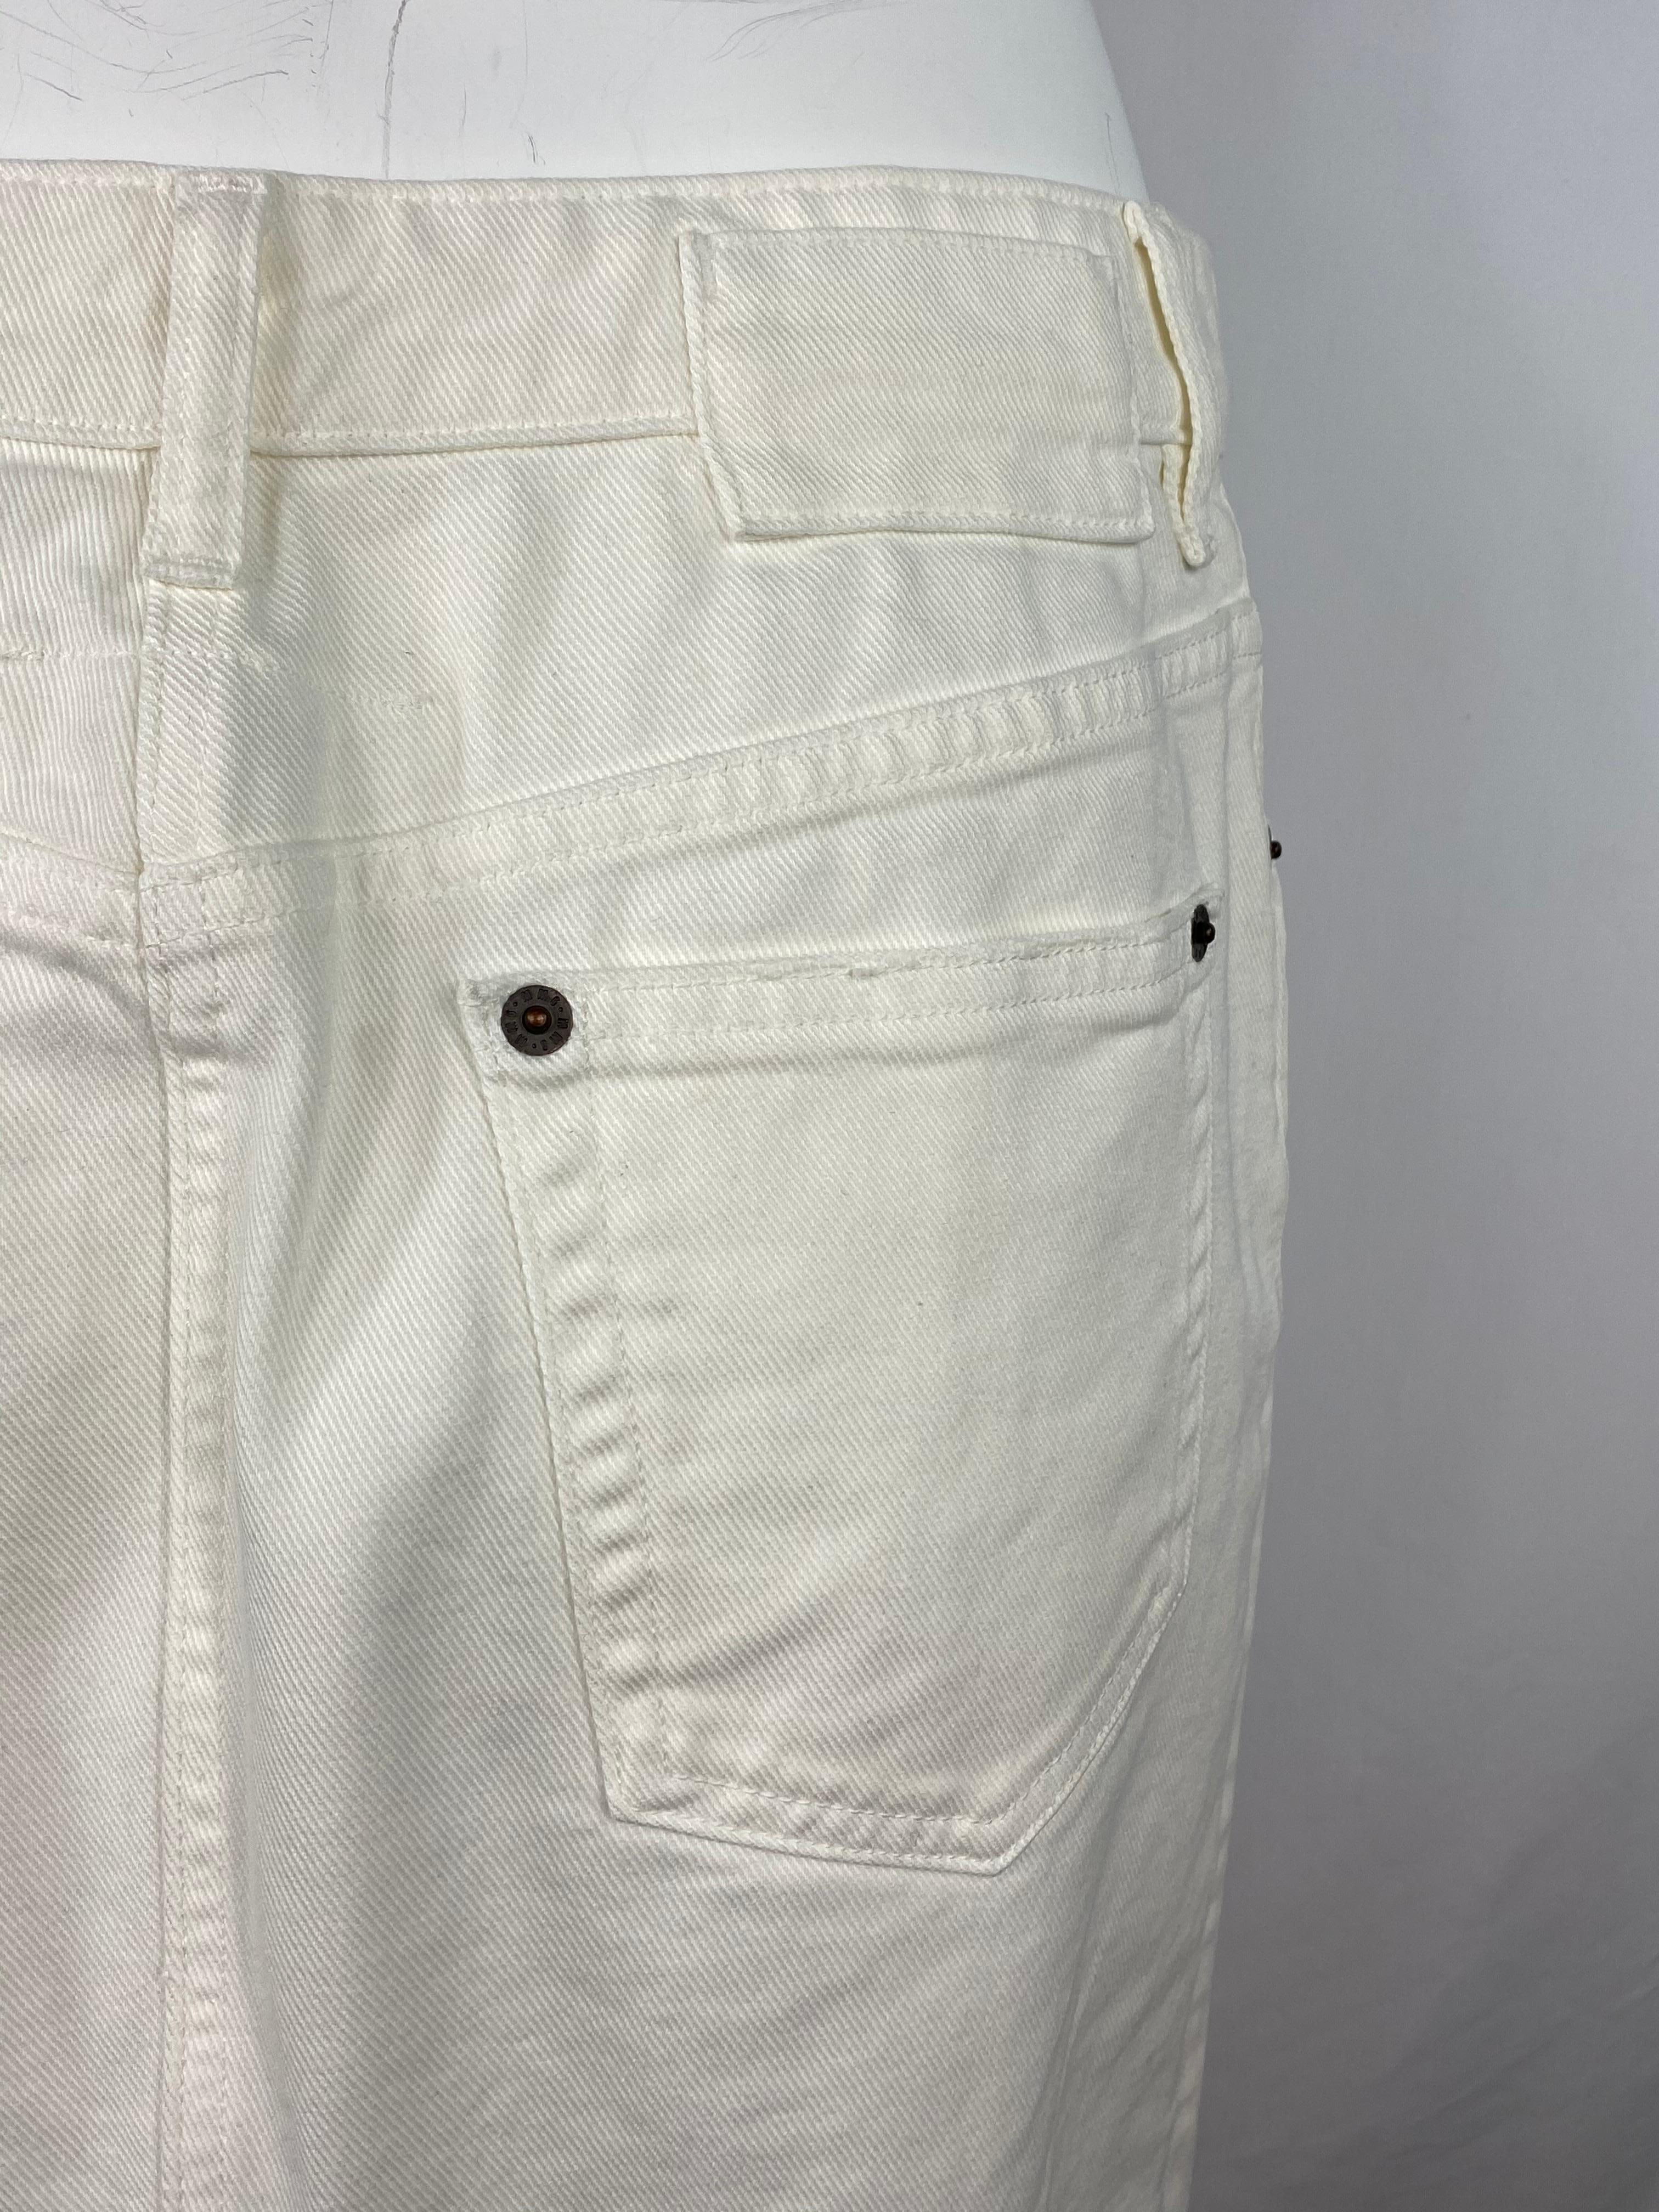 MM6 Maison Margiela White Denim Pencil Skirt, Size 42 In Excellent Condition For Sale In Beverly Hills, CA